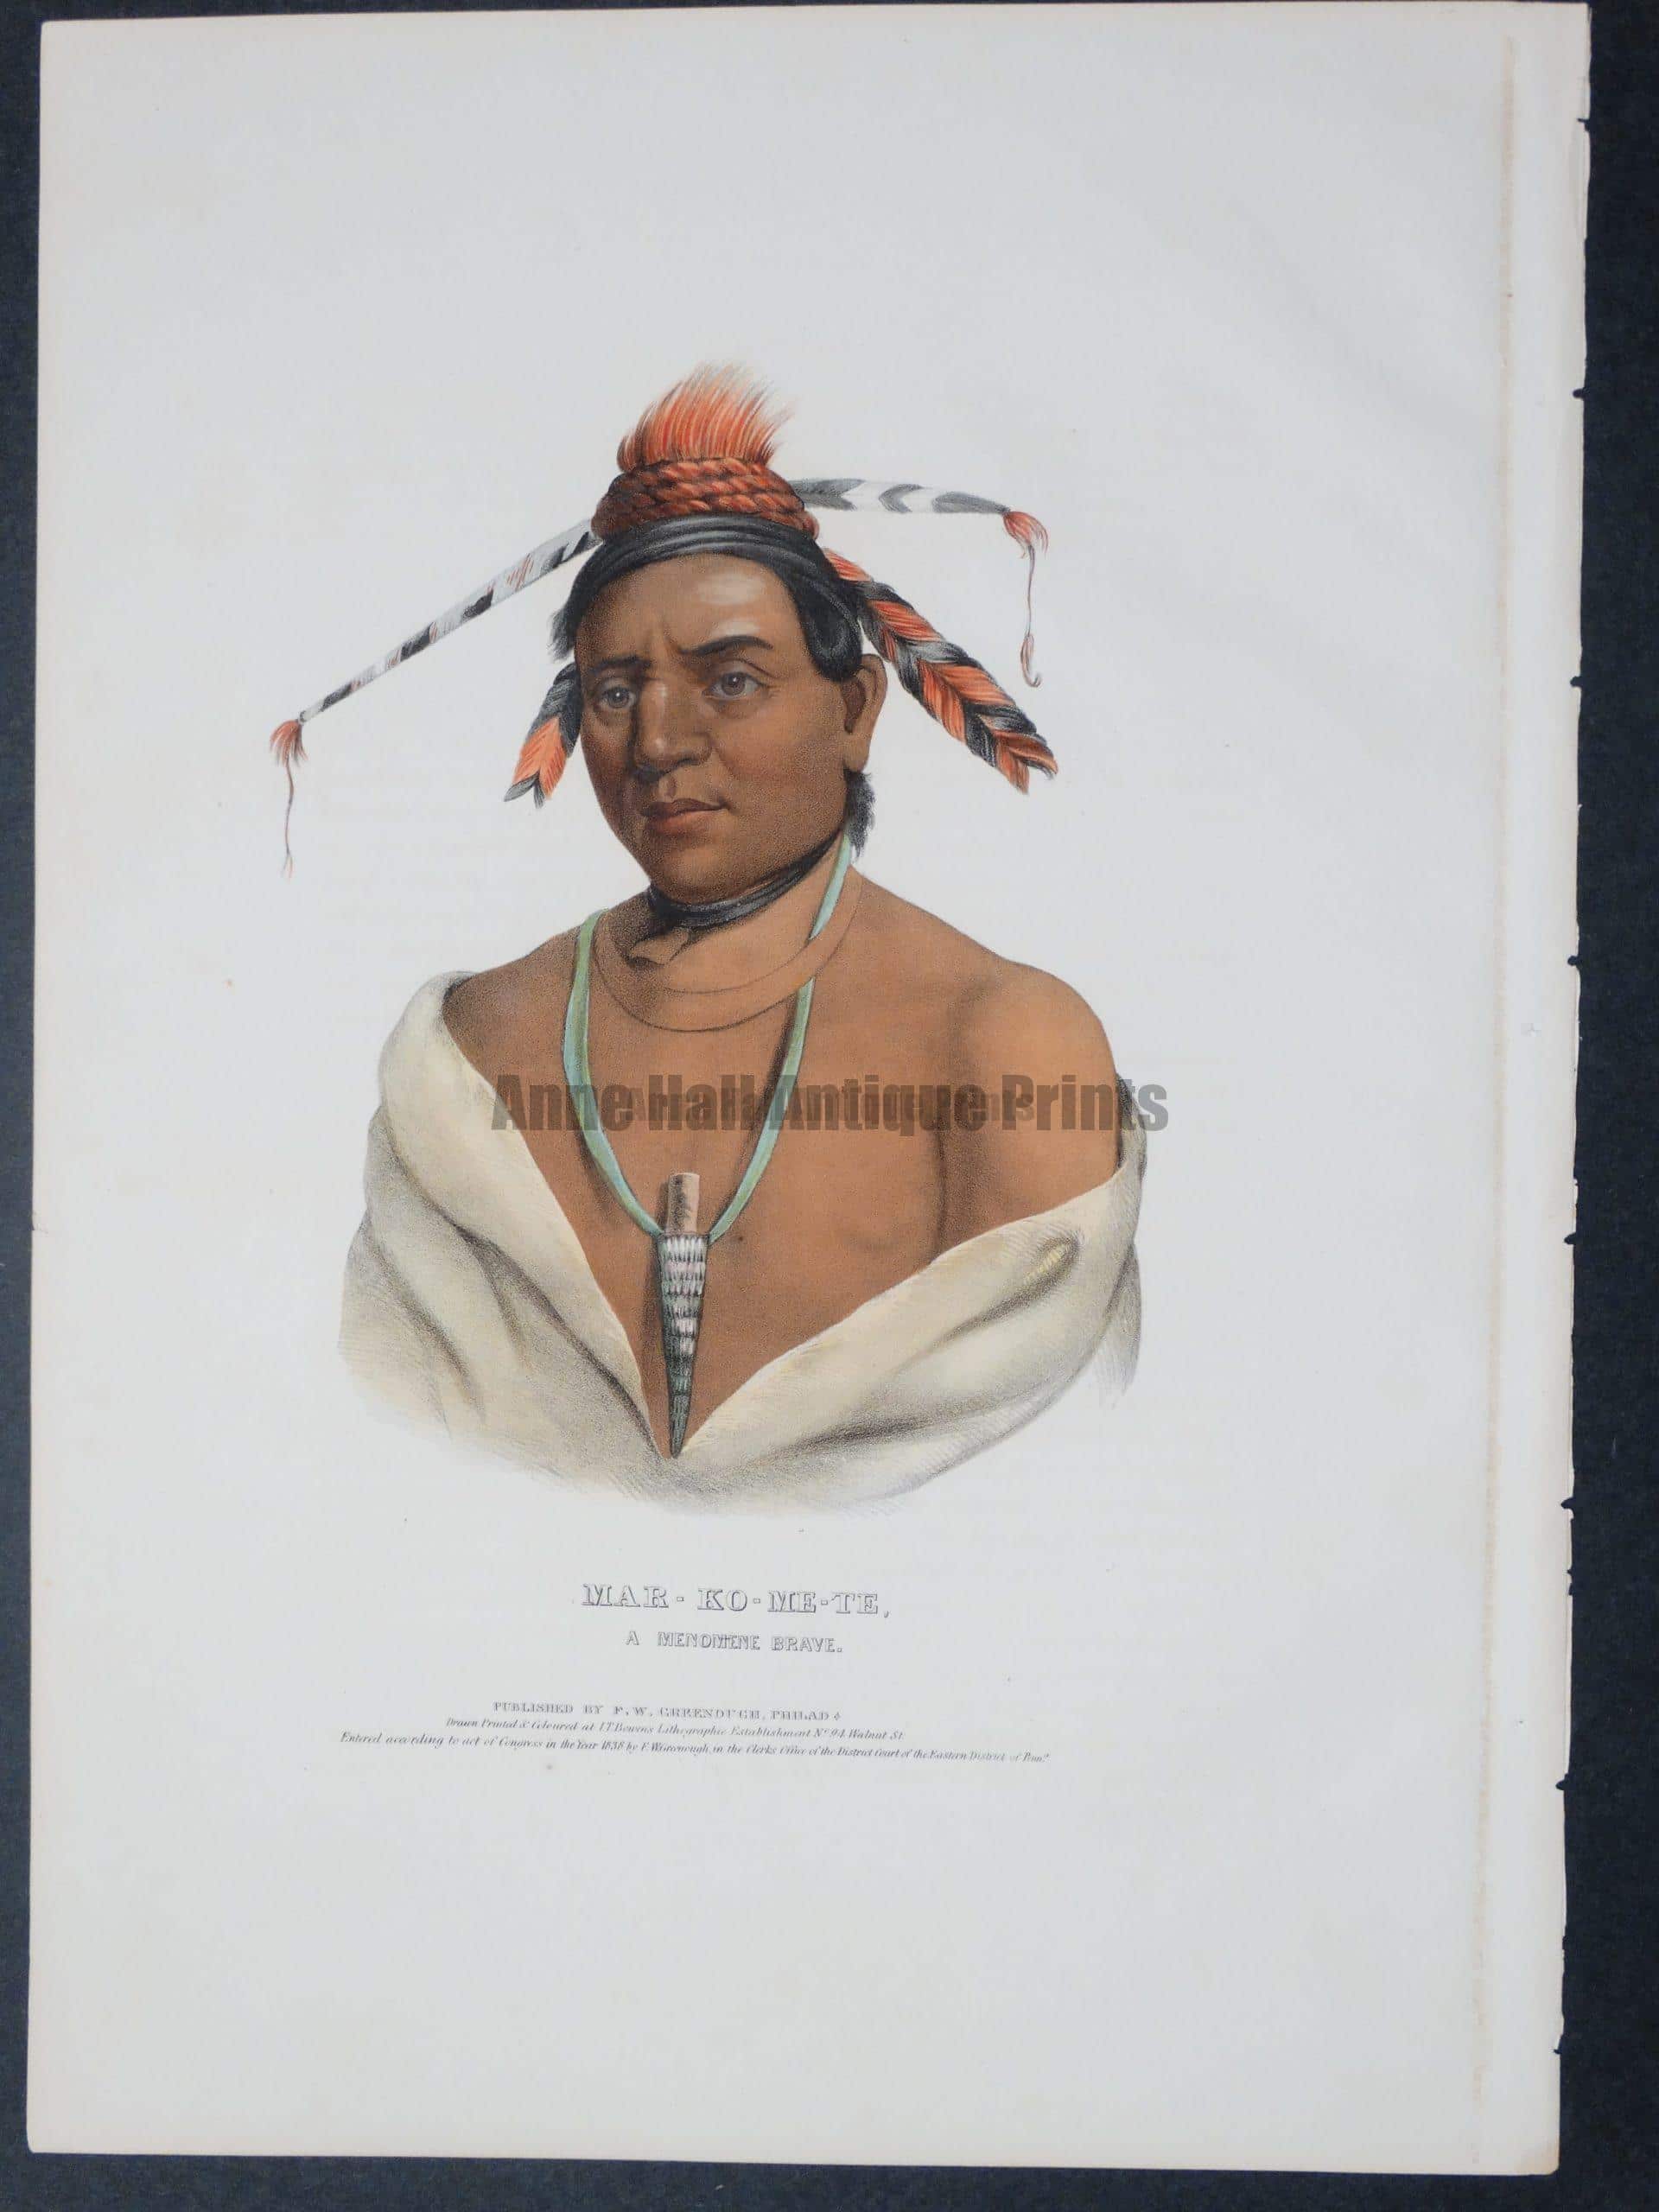 Mar-Ko-Me-Te, a Menomene Brave. Original folio hand-colored lithograph. McKenney and Hall's, Indian Tribes of North America